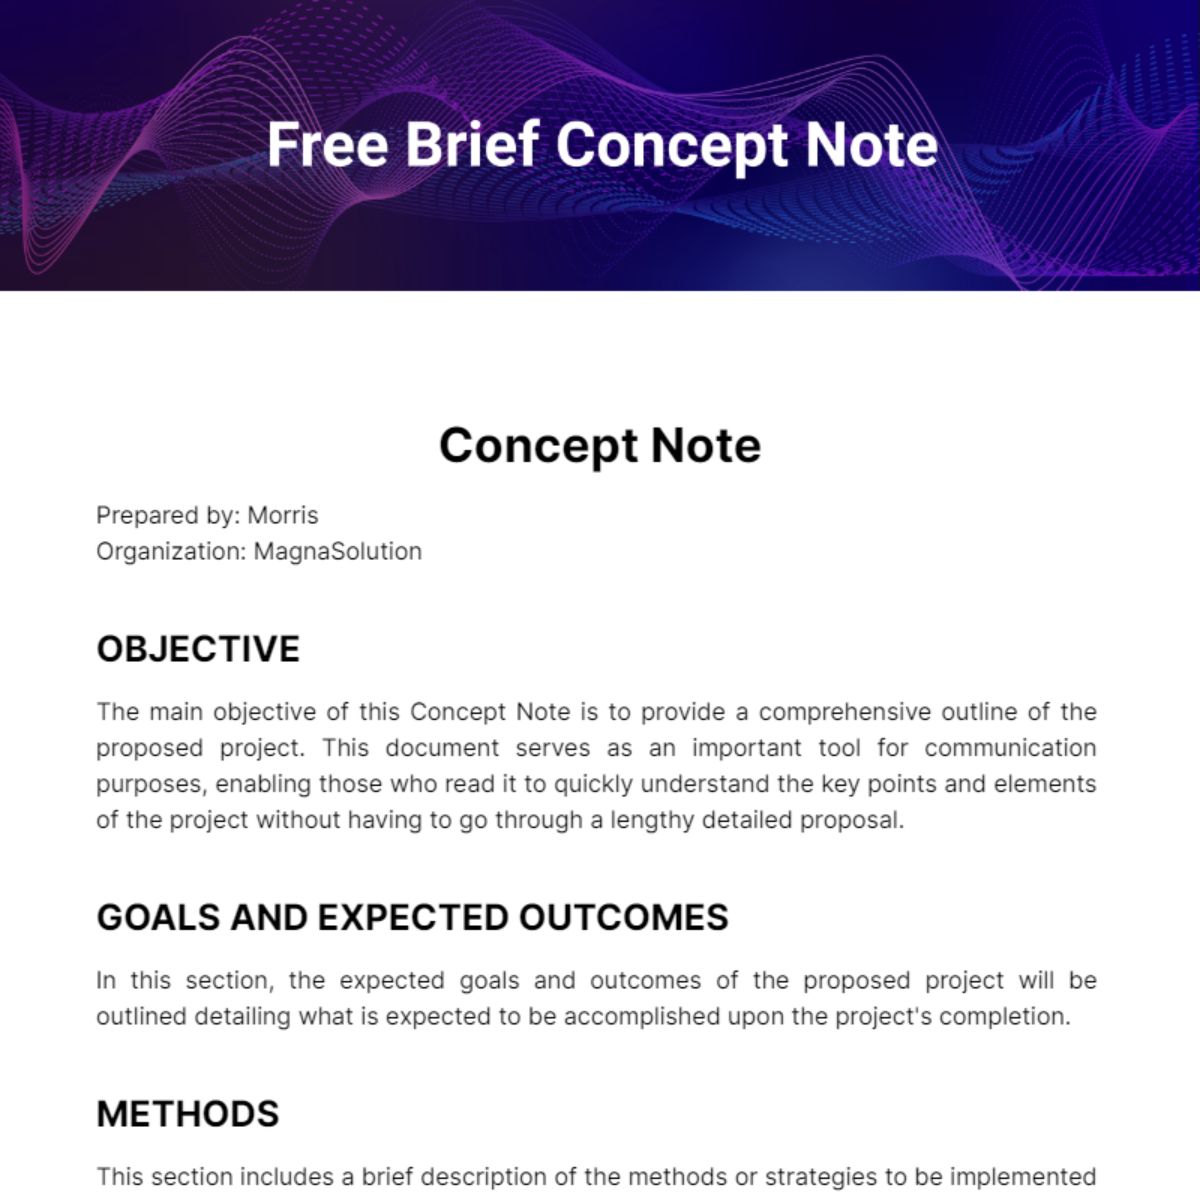 Free Brief Concept Note Template